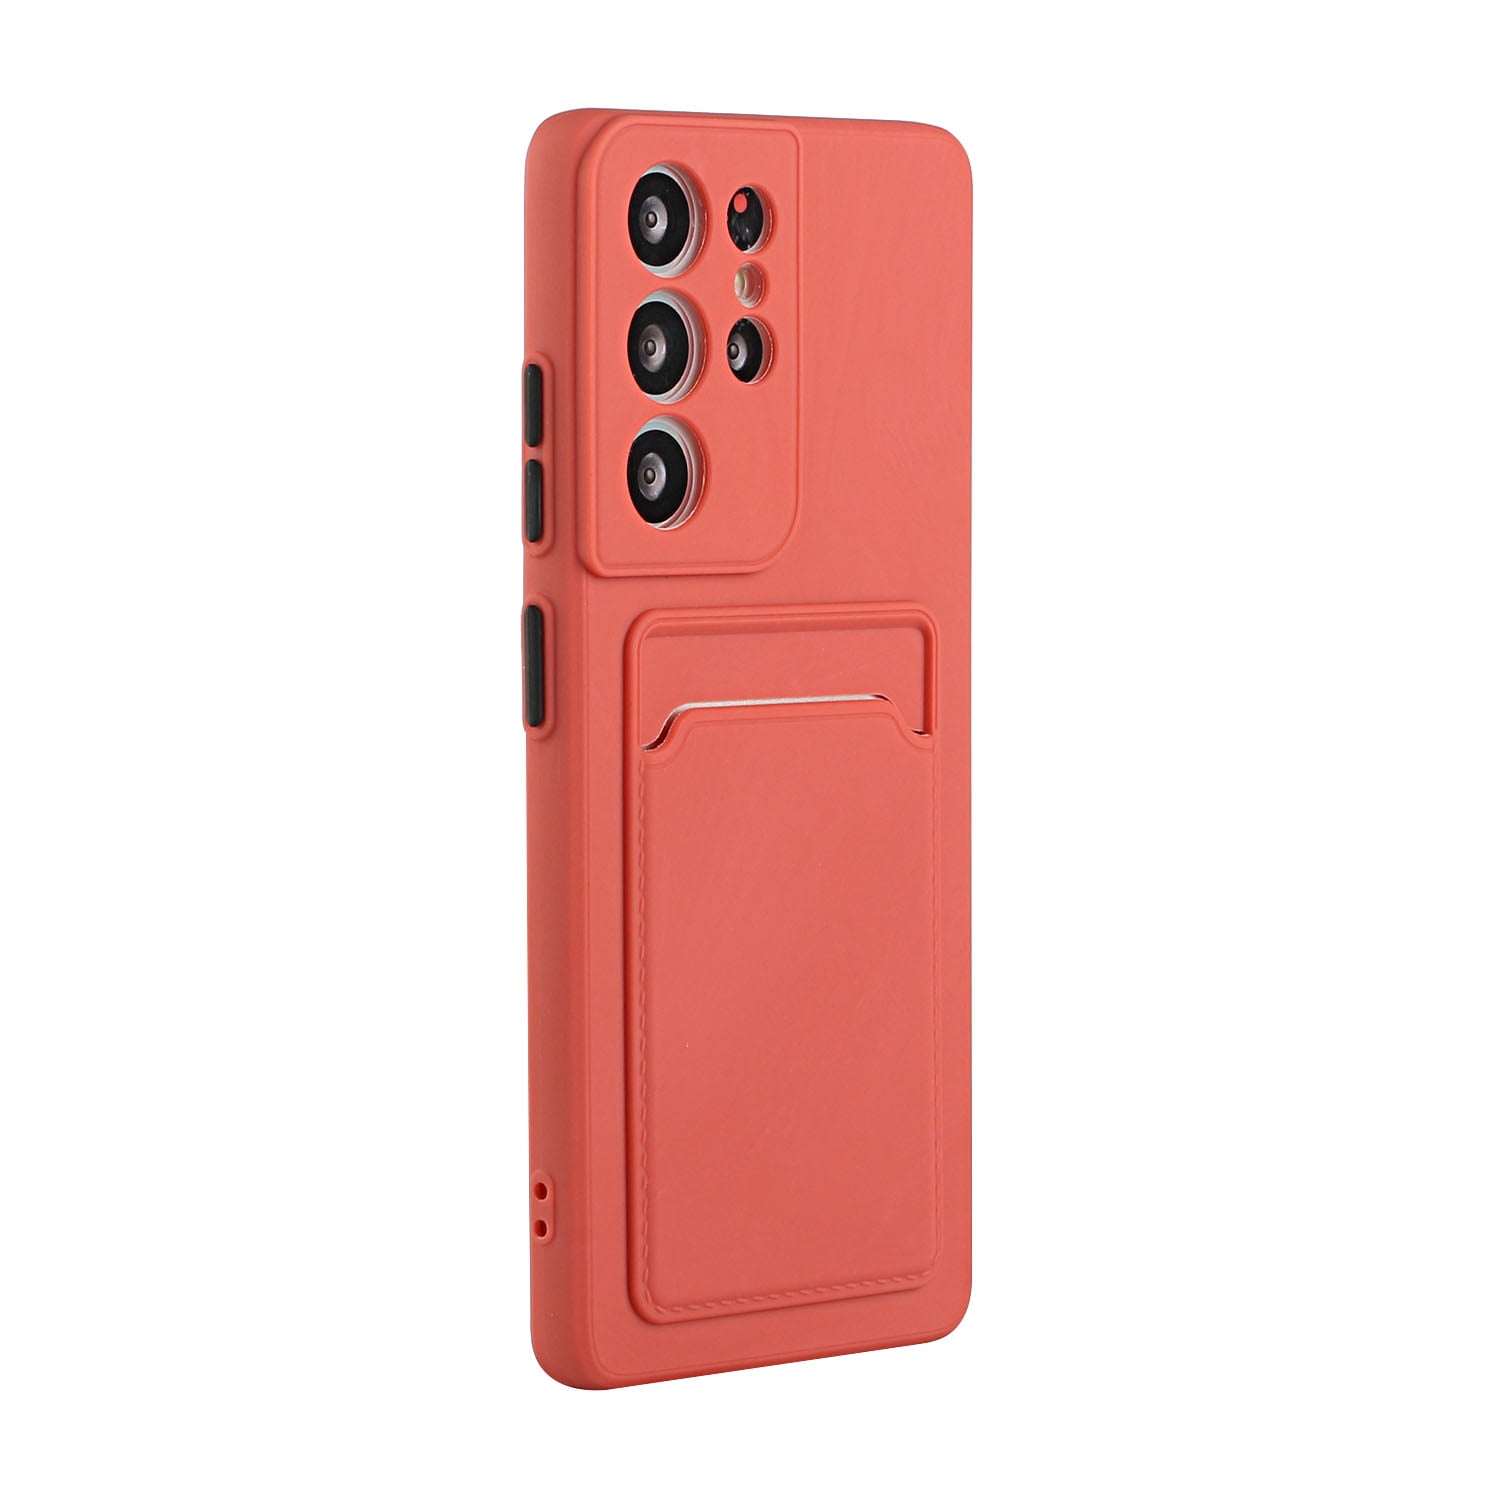  TPU Cover for Cubot Note 21, Flexible Silicone Slim